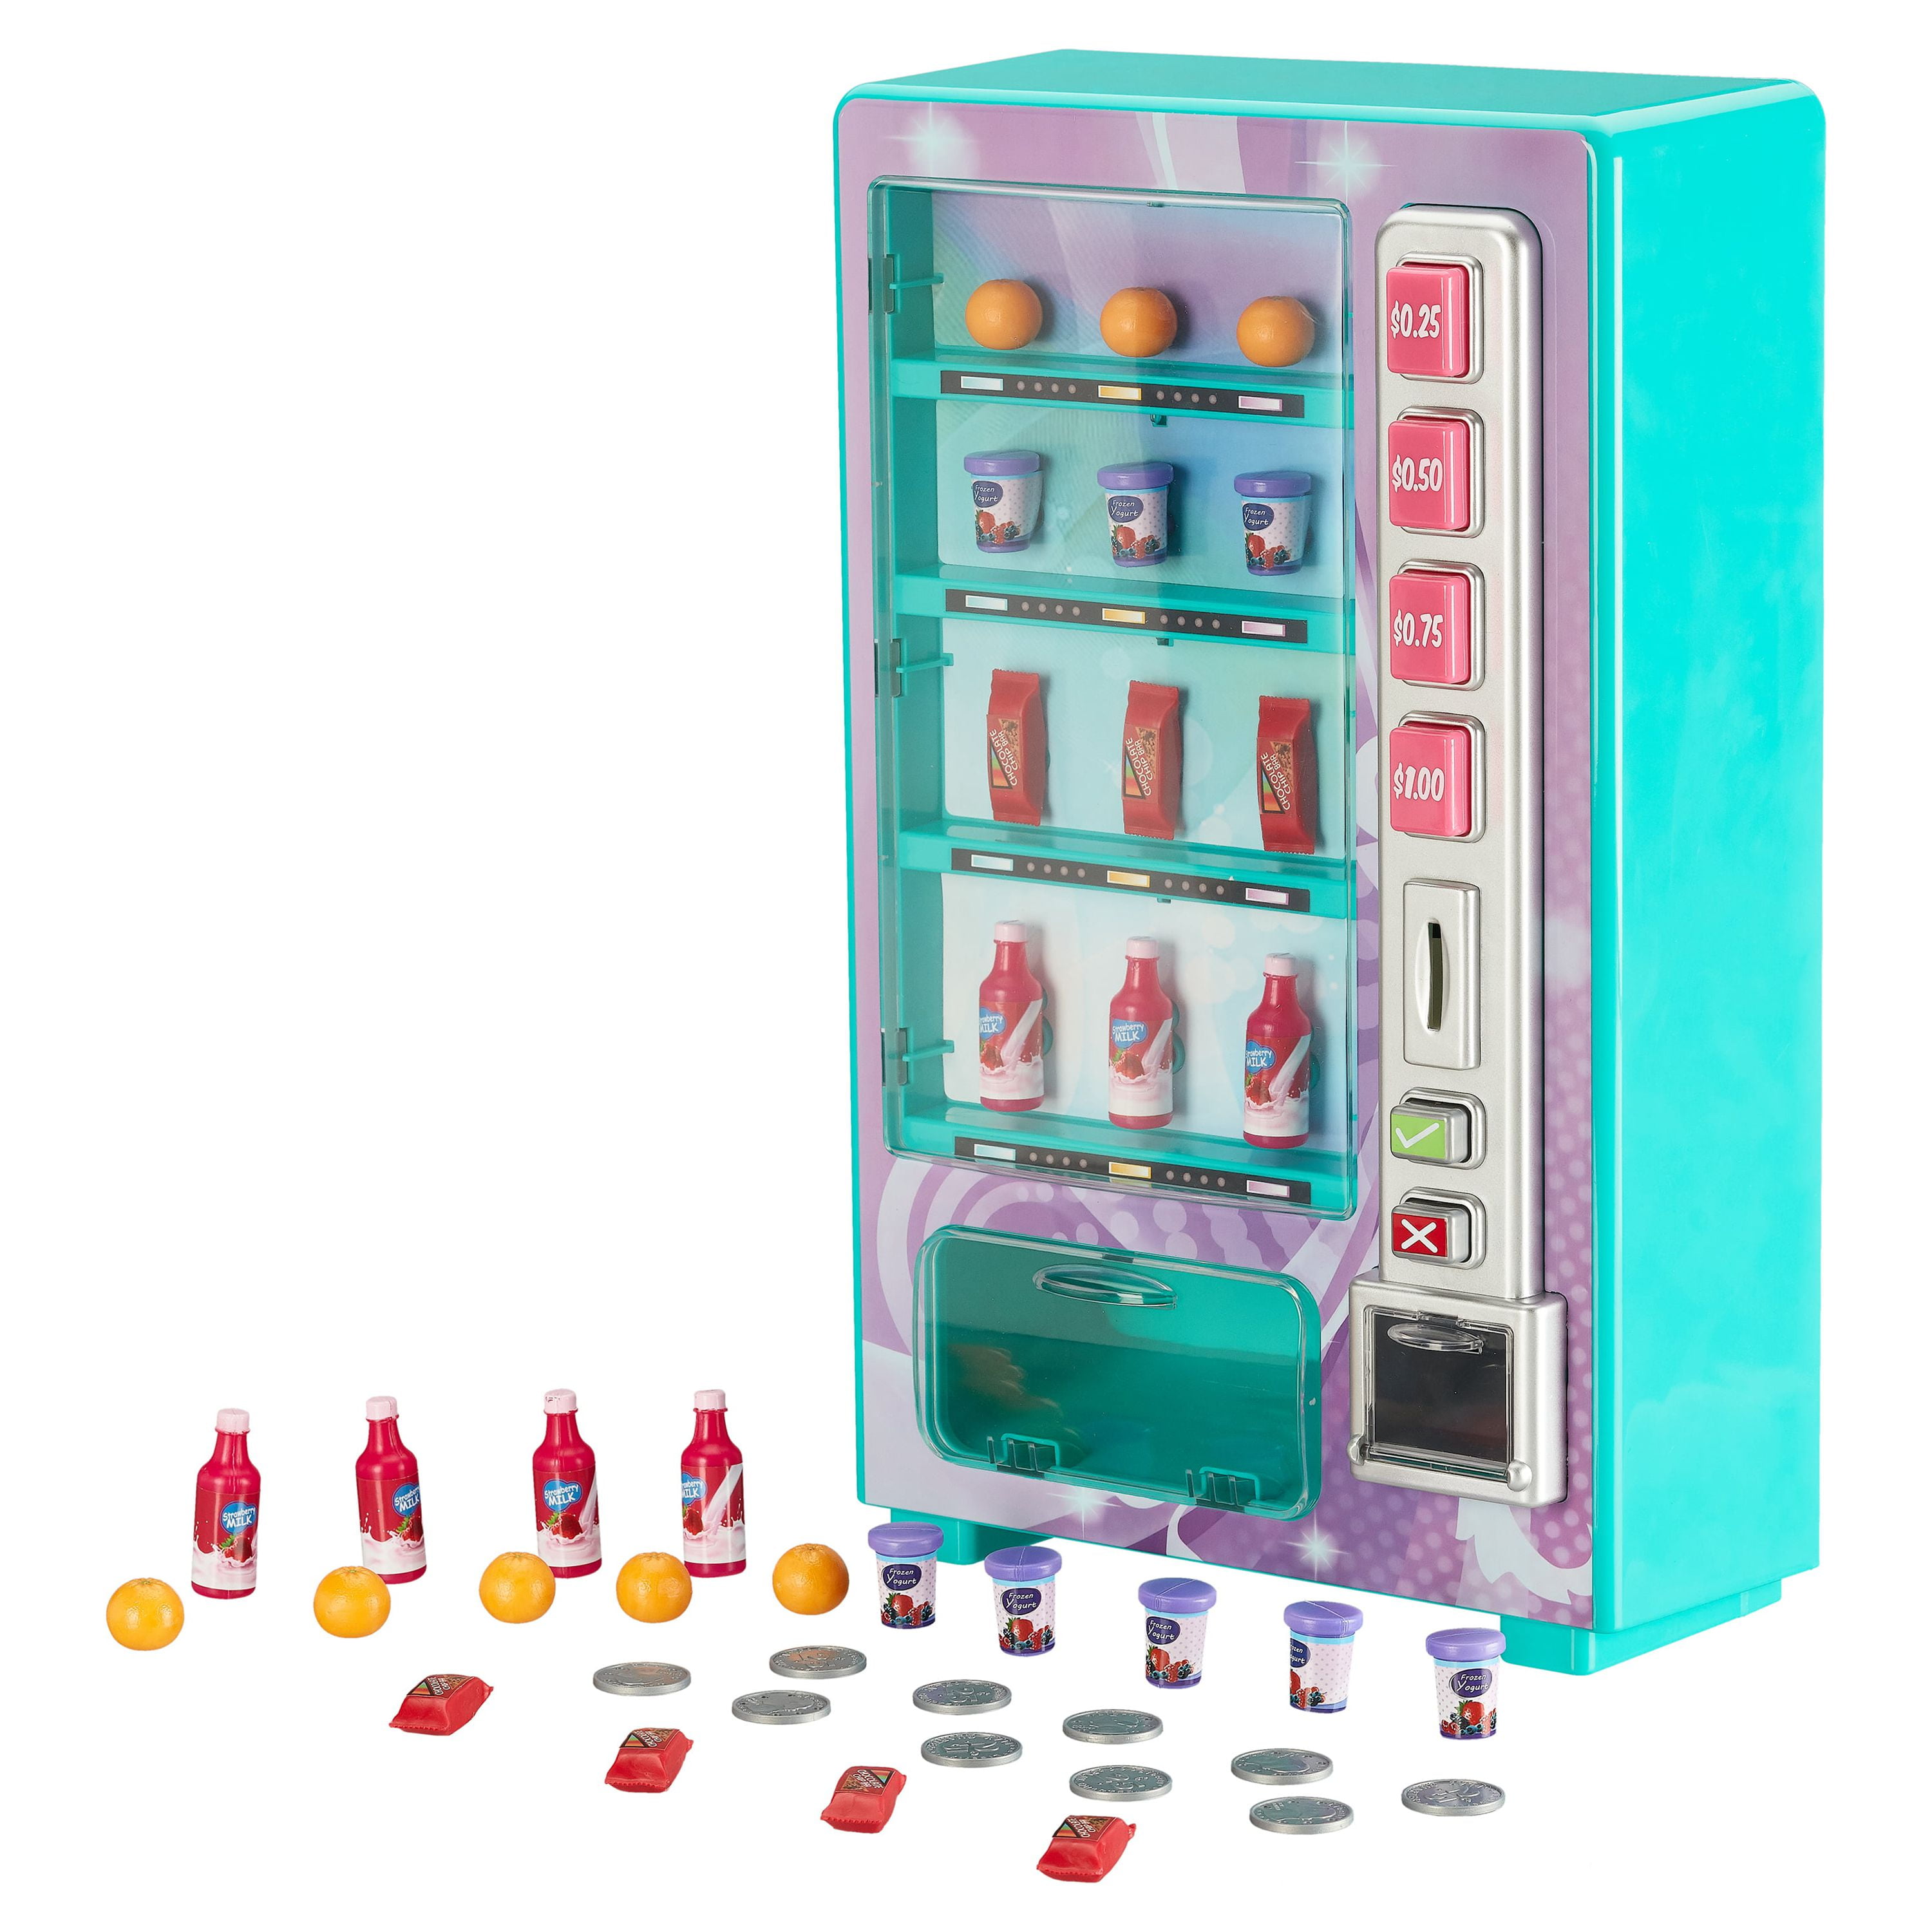 My Life As Motorized Vending Machine Play Set for 18 Dolls, 29 Pieces 